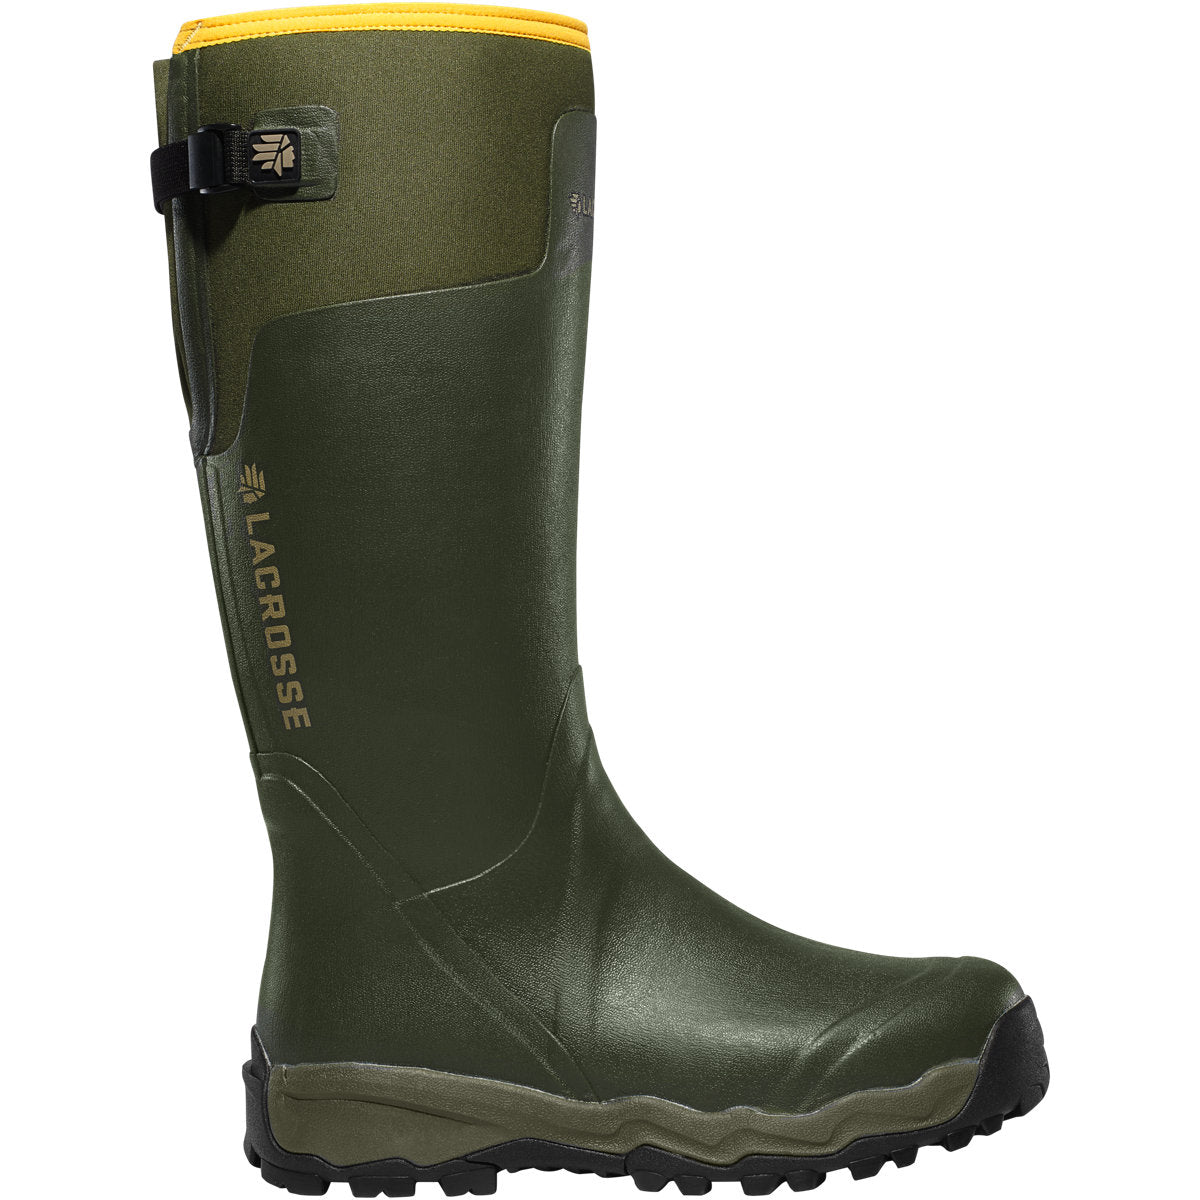 Lacrosse Alphaburly Pro 18" Hunting Boot - Premium rubber and neoprene. Lightweight, warm, waterproof. Ideal for mud, snow, and tough terrain.

